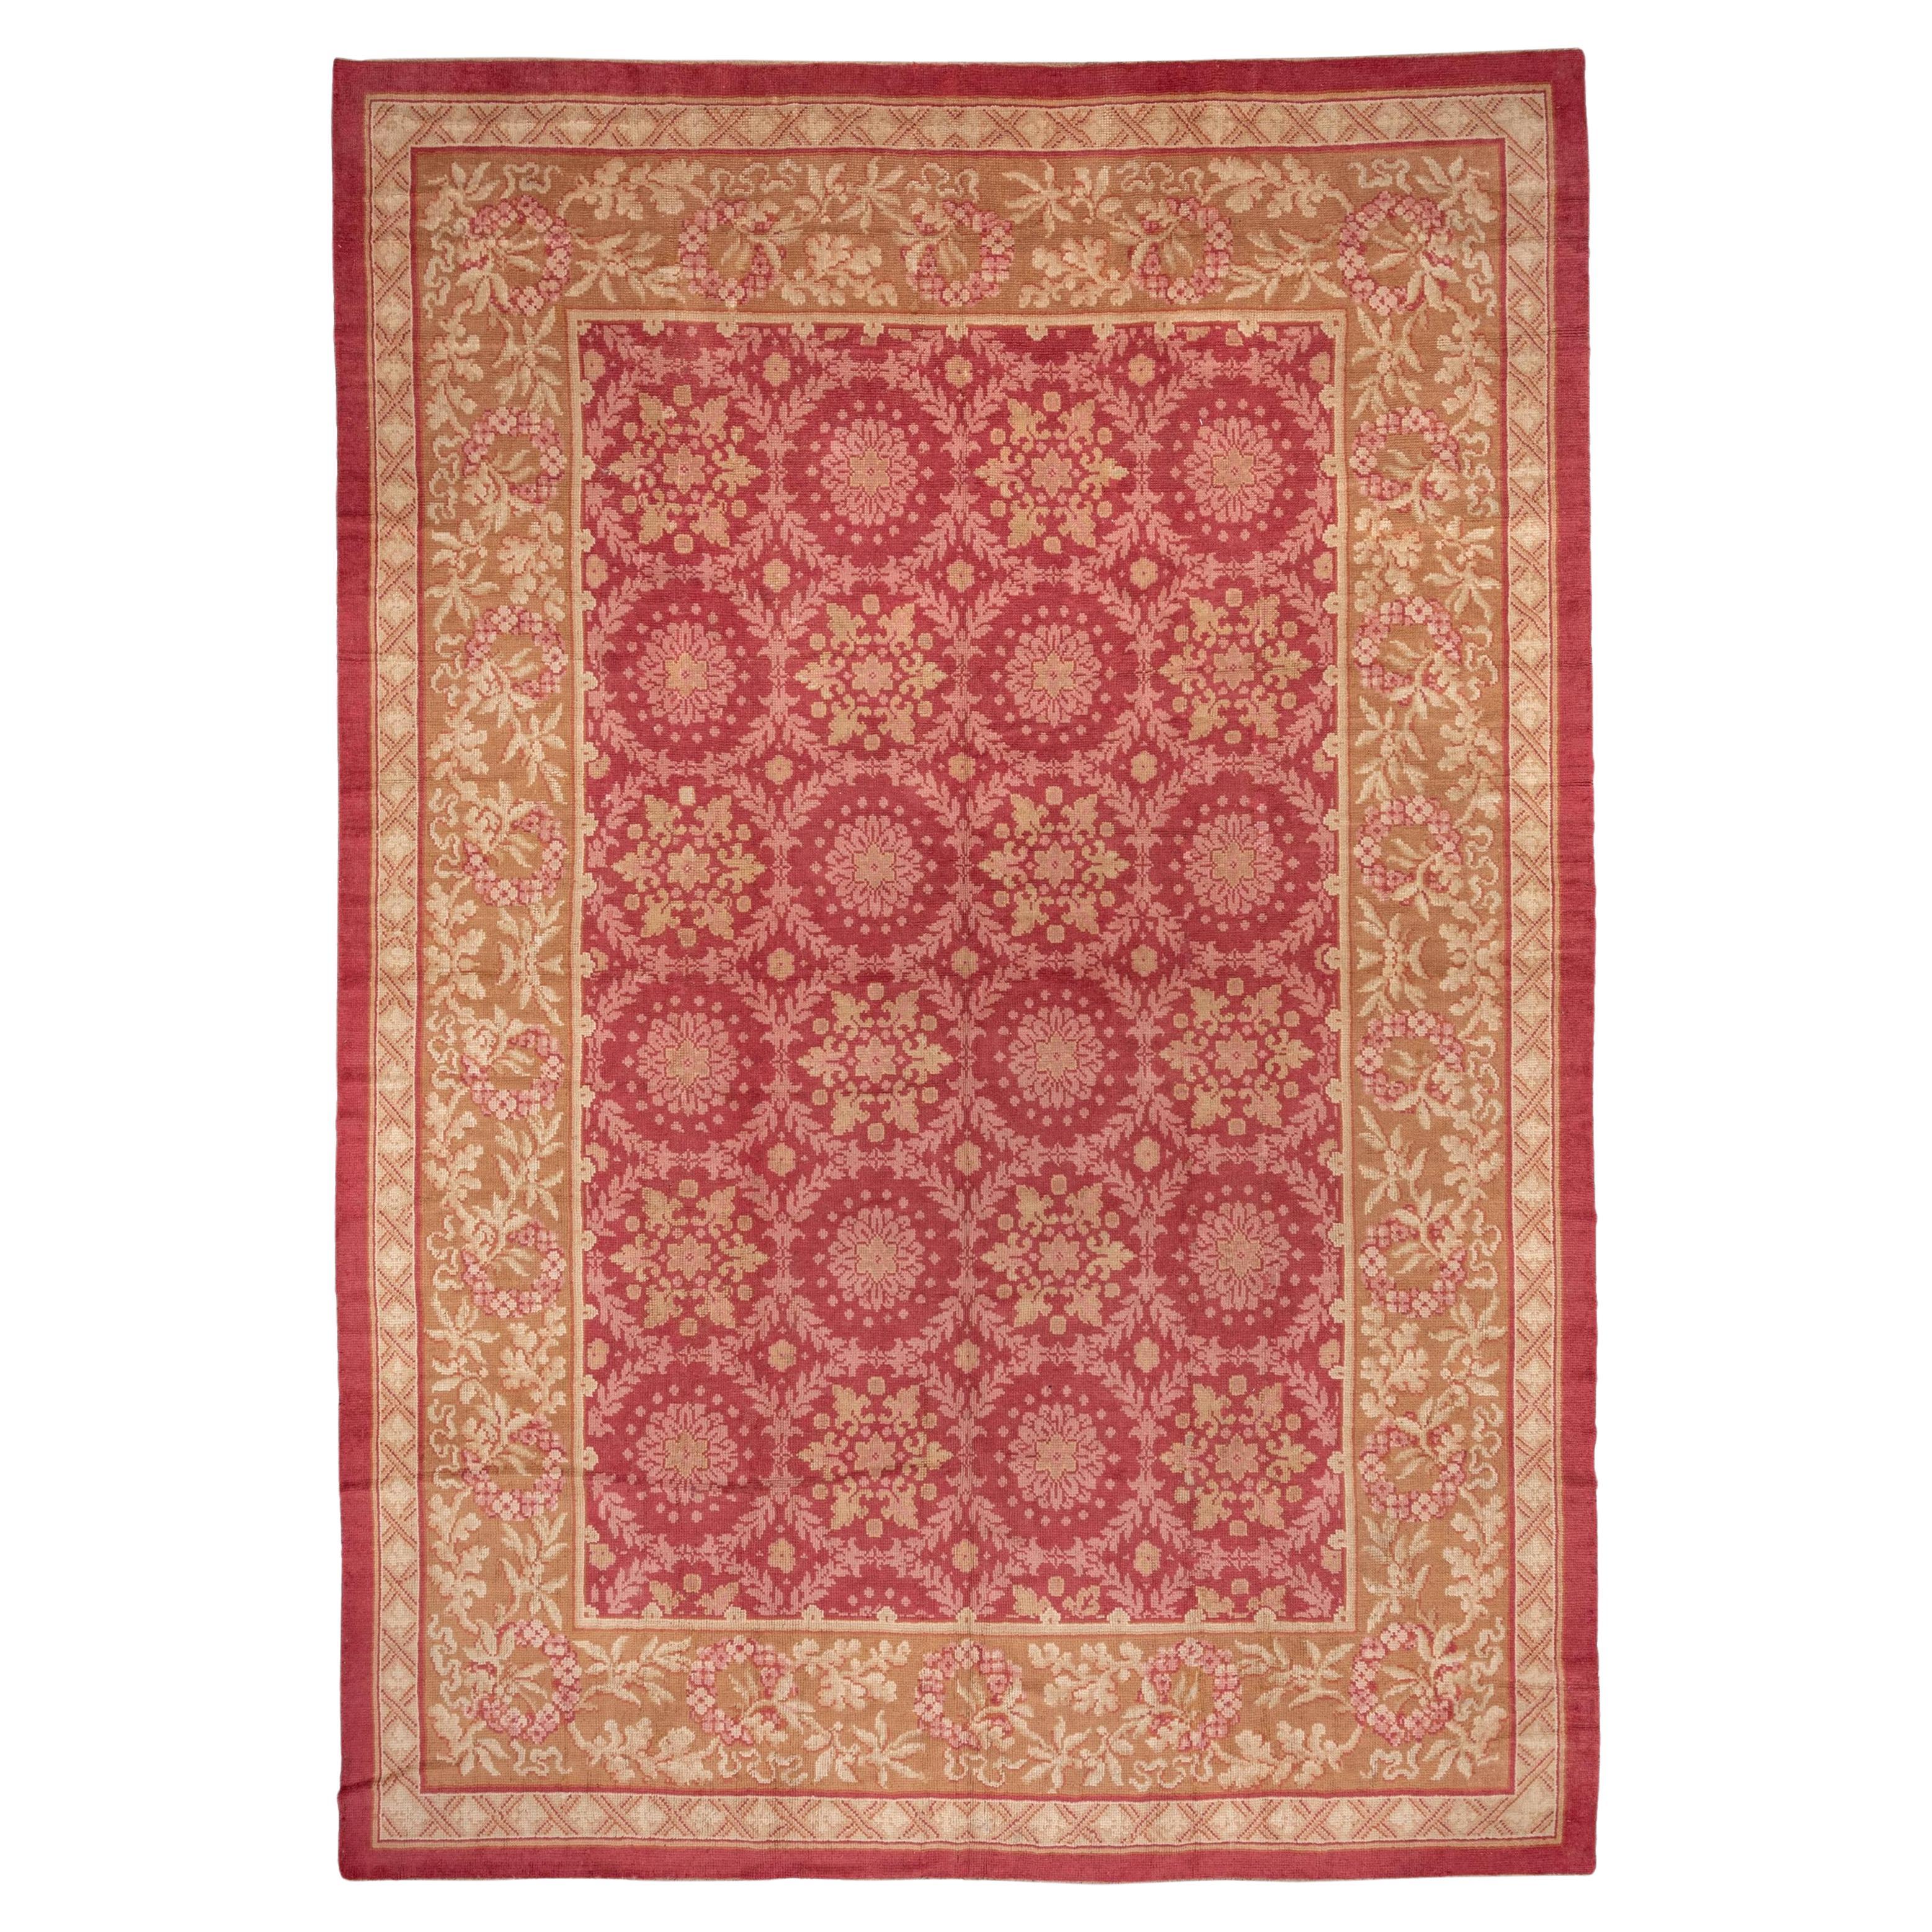 Antique French Savonnerie Carpet, Red Field For Sale